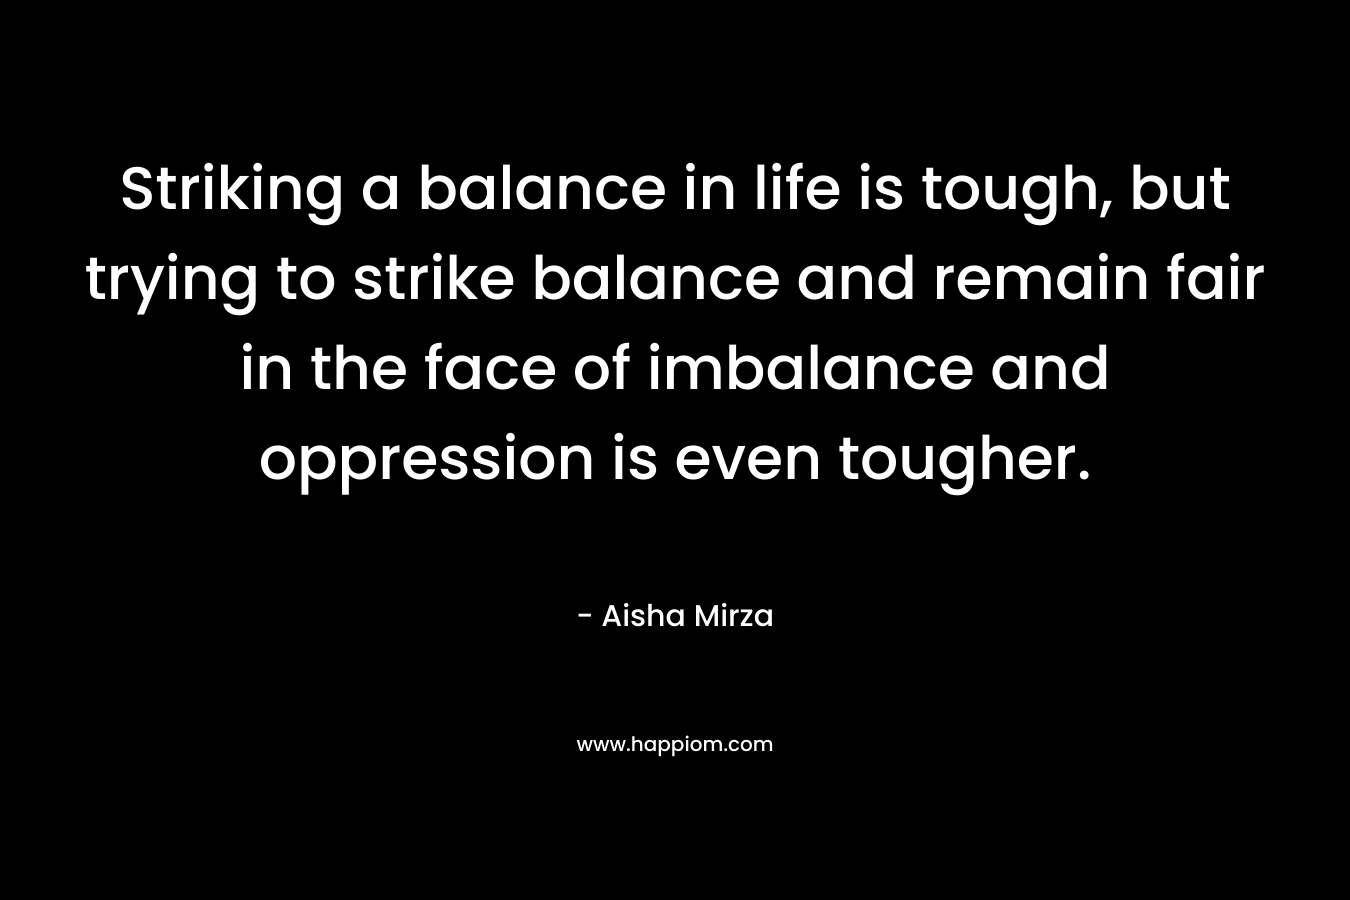 Striking a balance in life is tough, but trying to strike balance and remain fair in the face of imbalance and oppression is even tougher. – Aisha Mirza